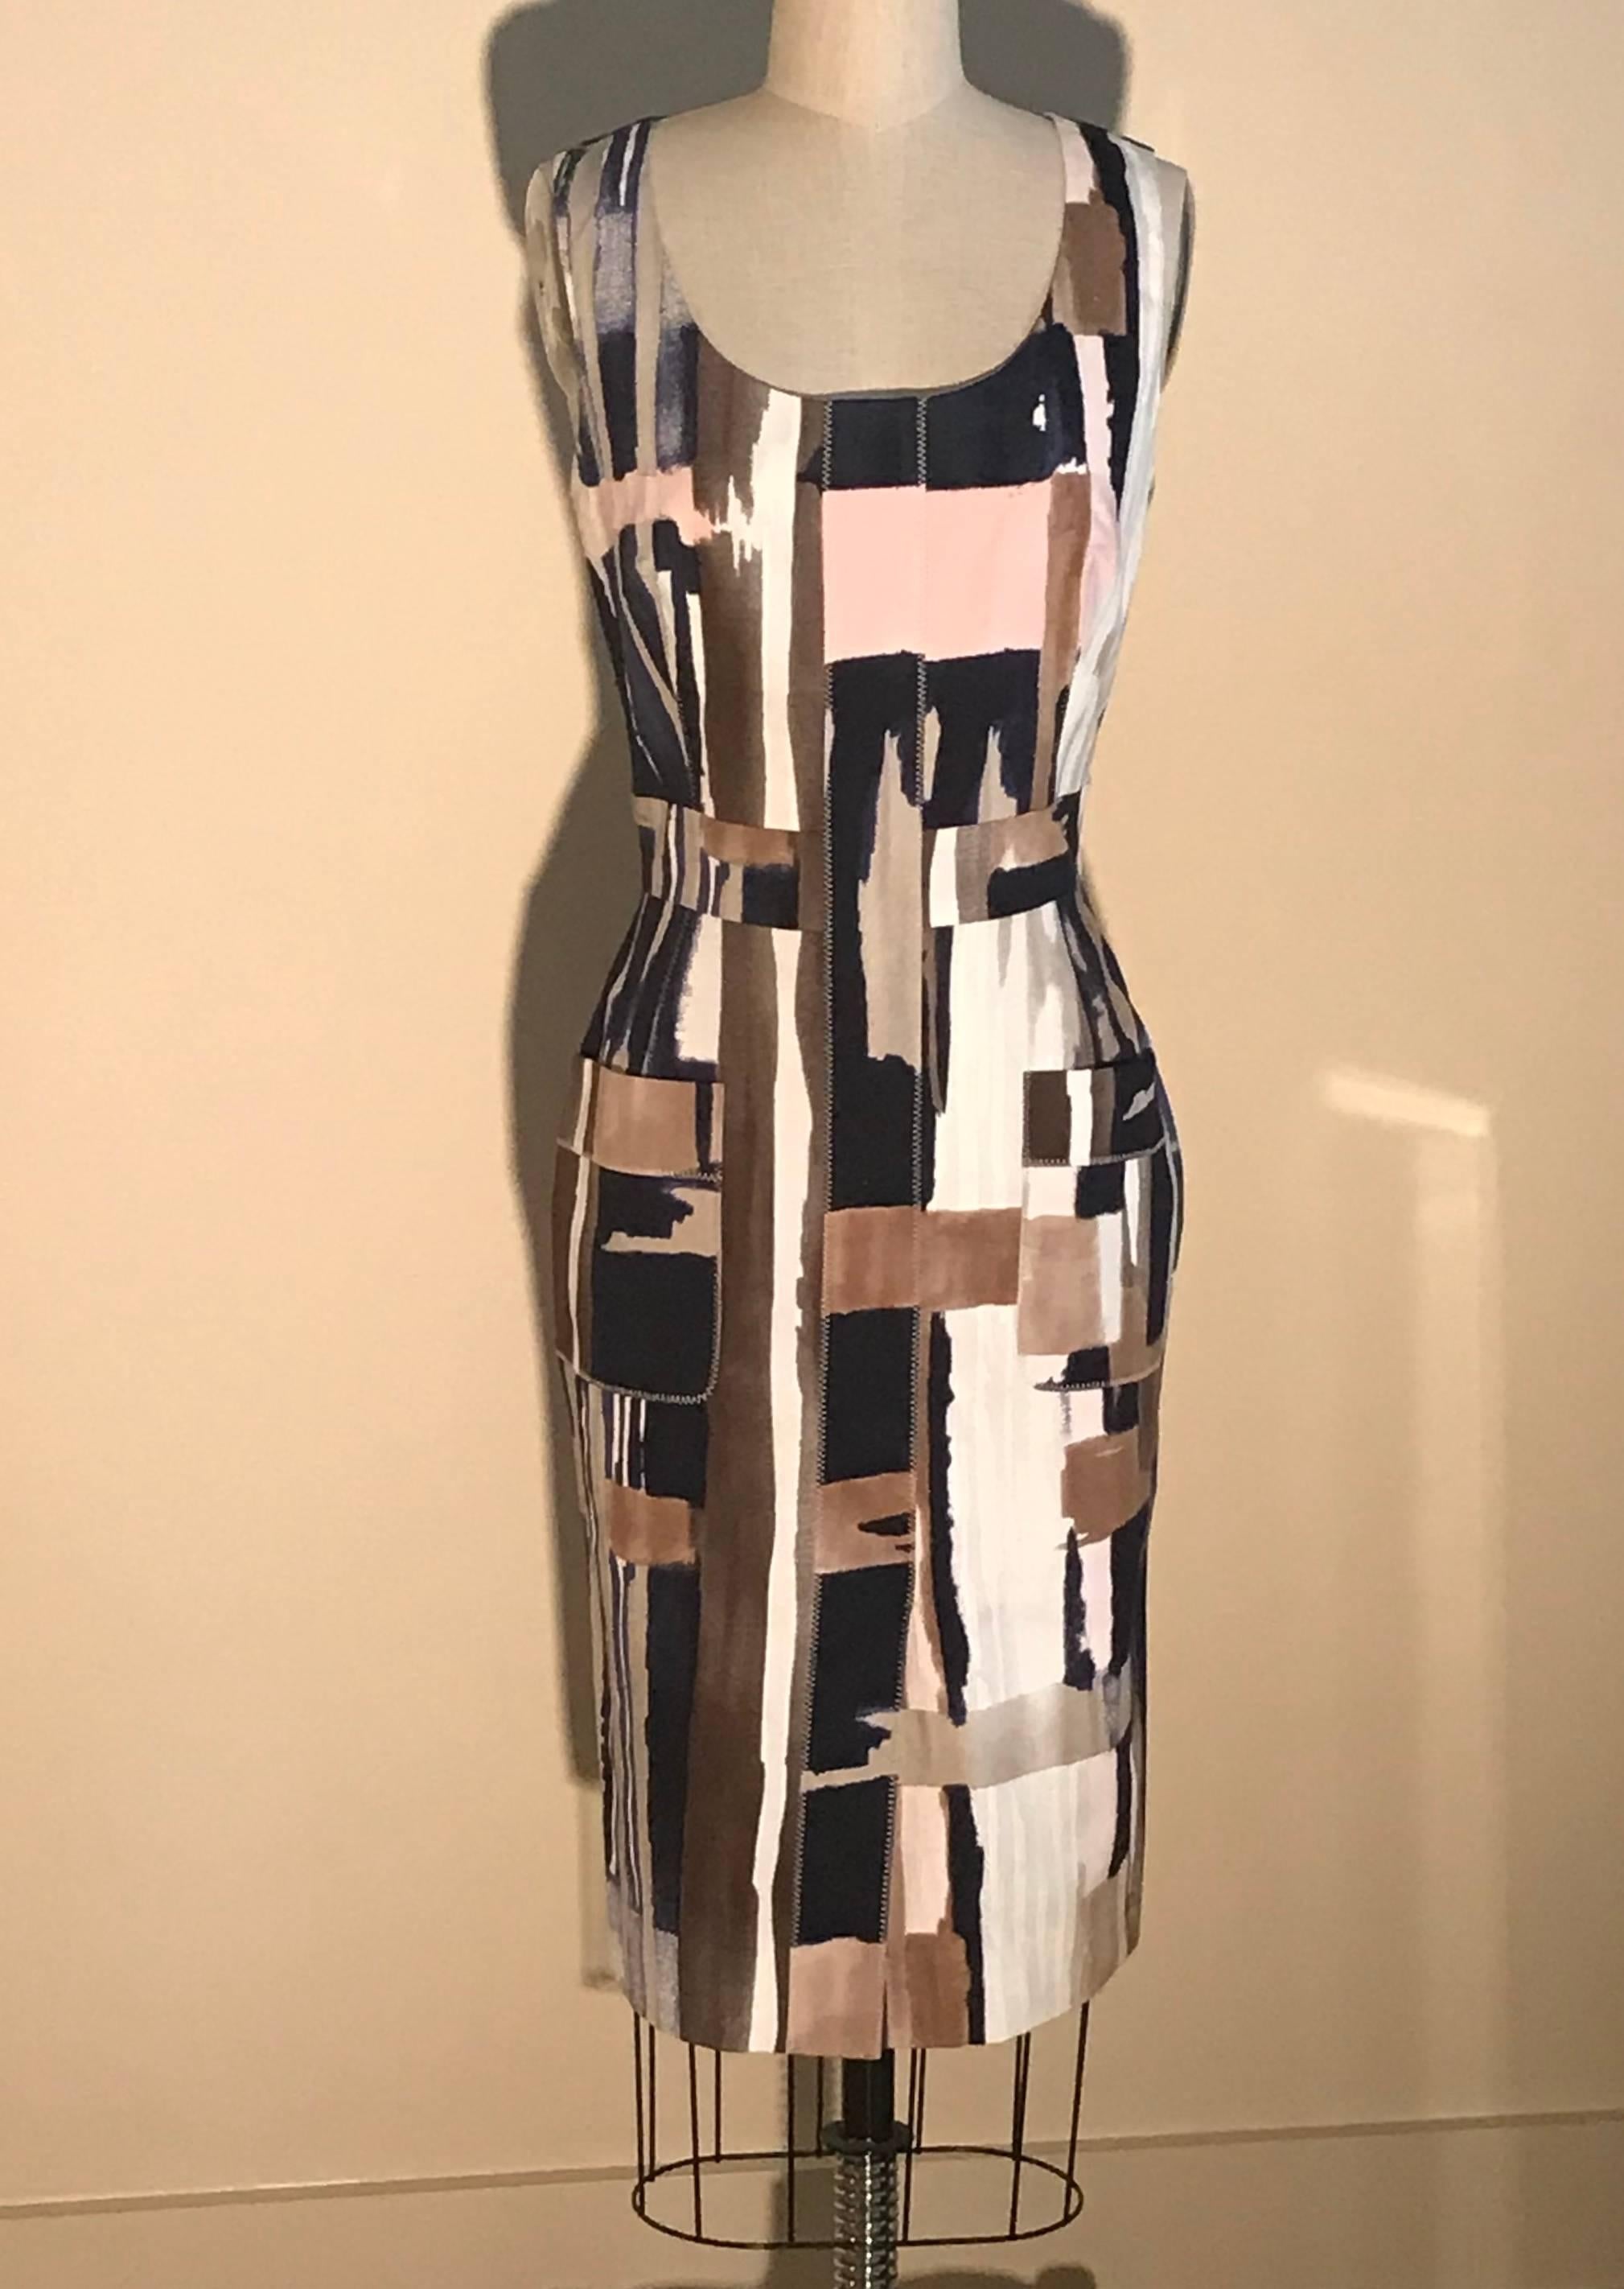 Oscar de la Renta cream, pink, black, and tan dress in a painterly print. Zig zag accent stitching and patch pockets at front. Back zip and hook and eye.

97% cotton, 3% elastane.
Fully lined in 100% silk.

Made in Italy.

Size US 8. See